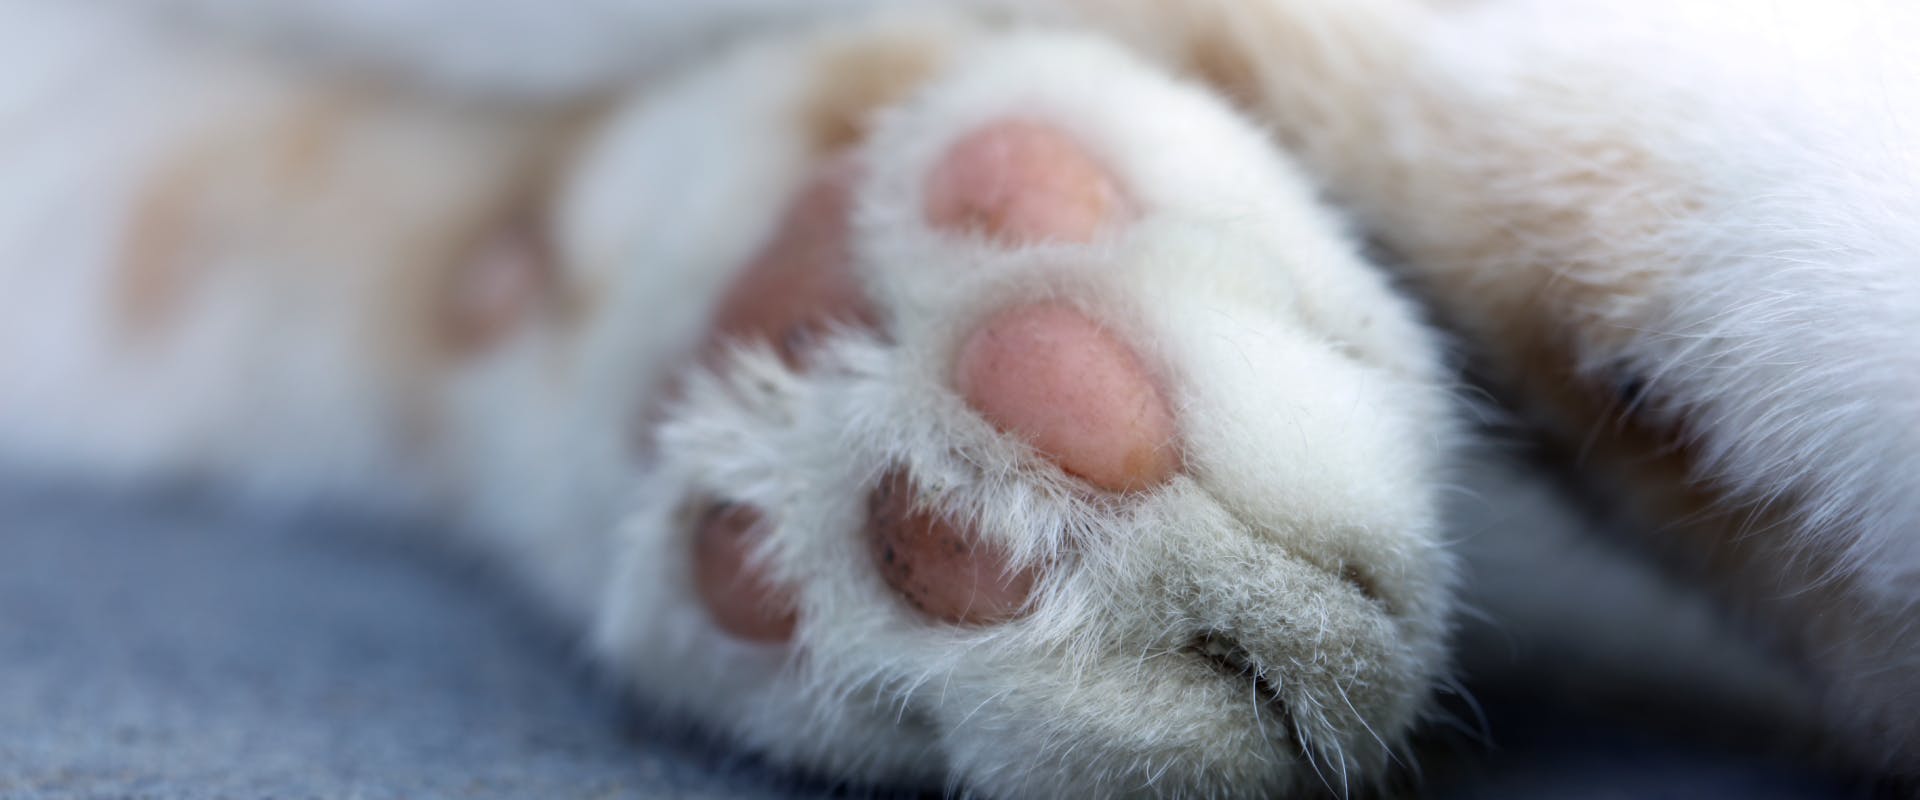 a close up of a cat's paw and toe beans whilst it's lying down